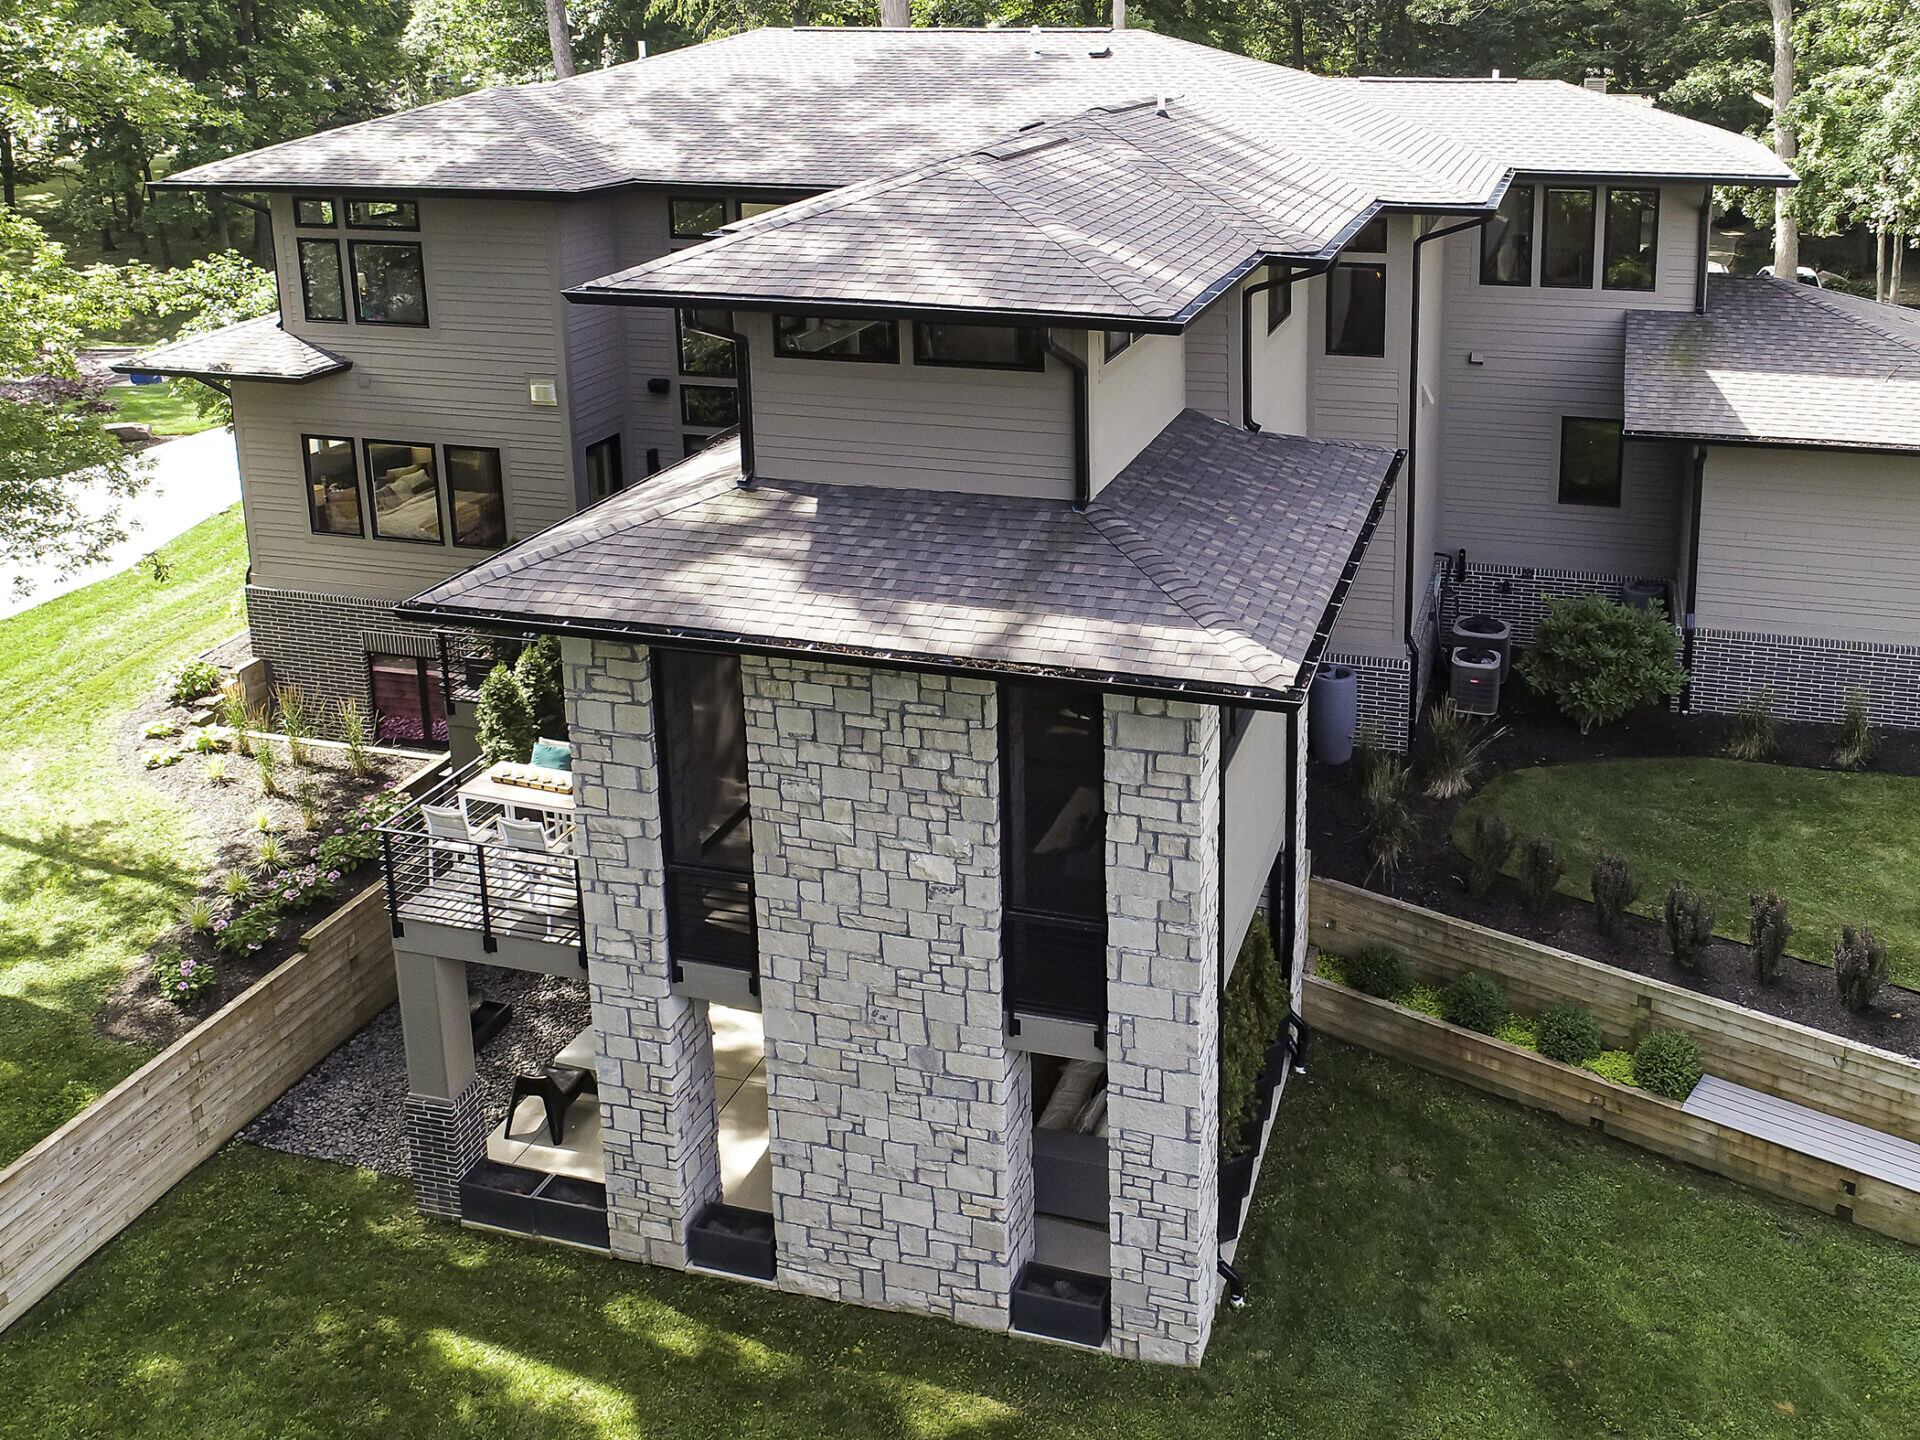 An aerial view of a custom home in the woods.